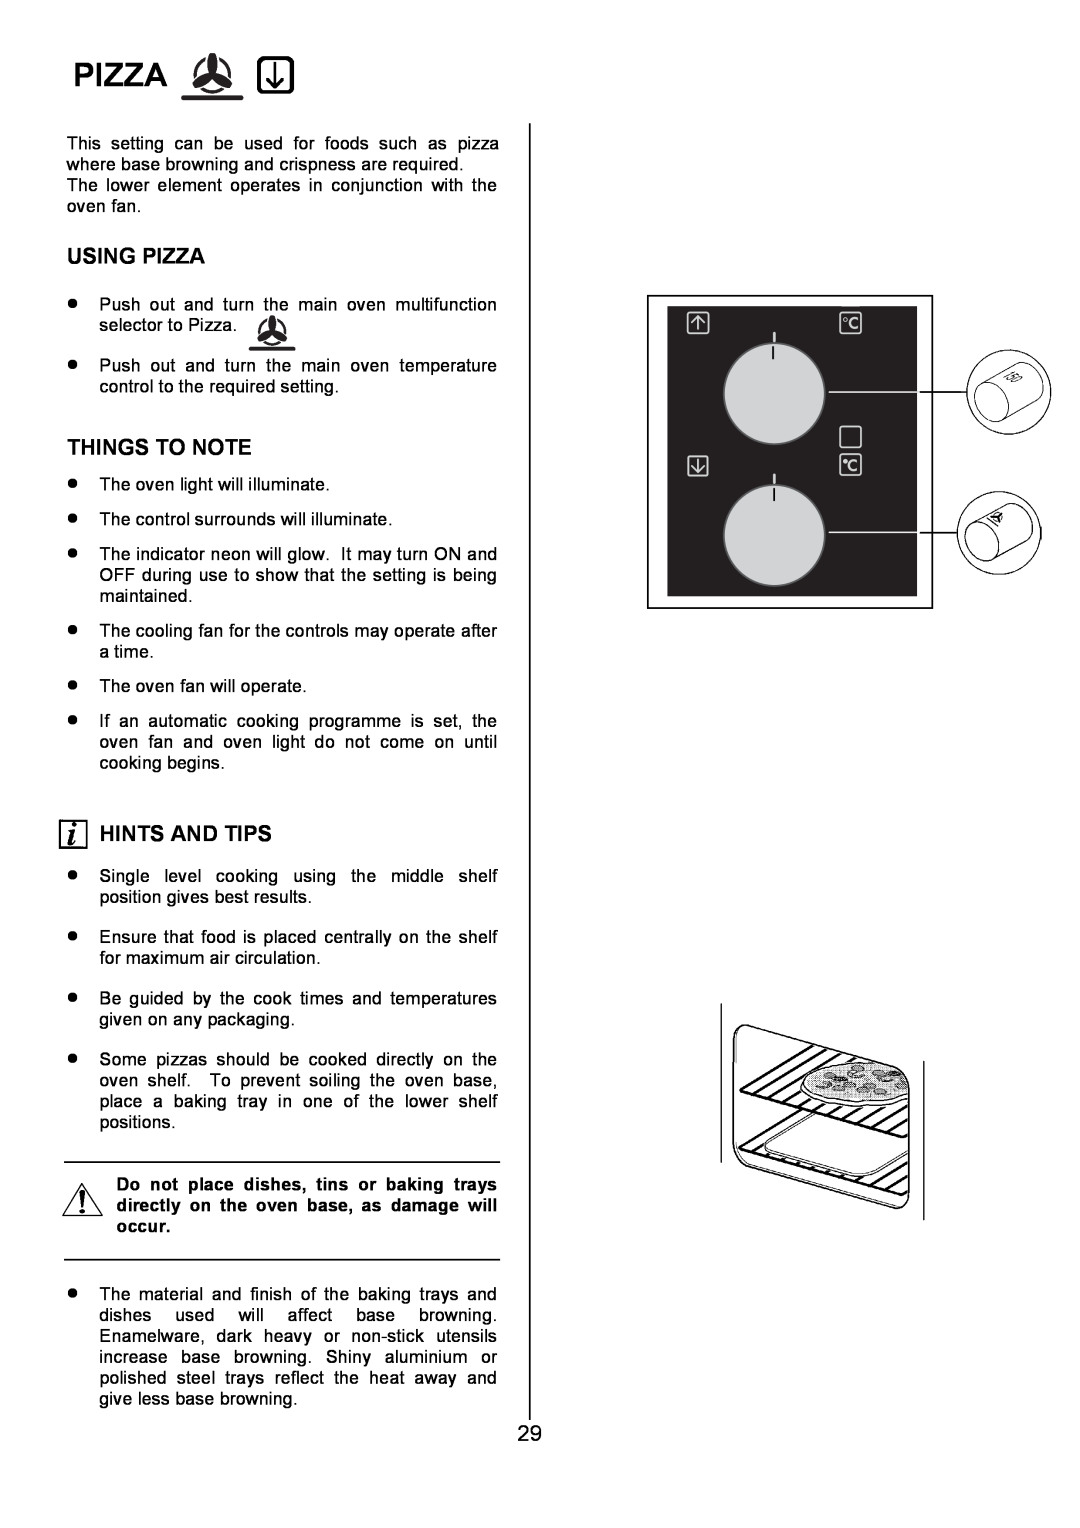 AEG 311704300, U7101-4 manual Using Pizza, Things To Note, Hints And Tips 